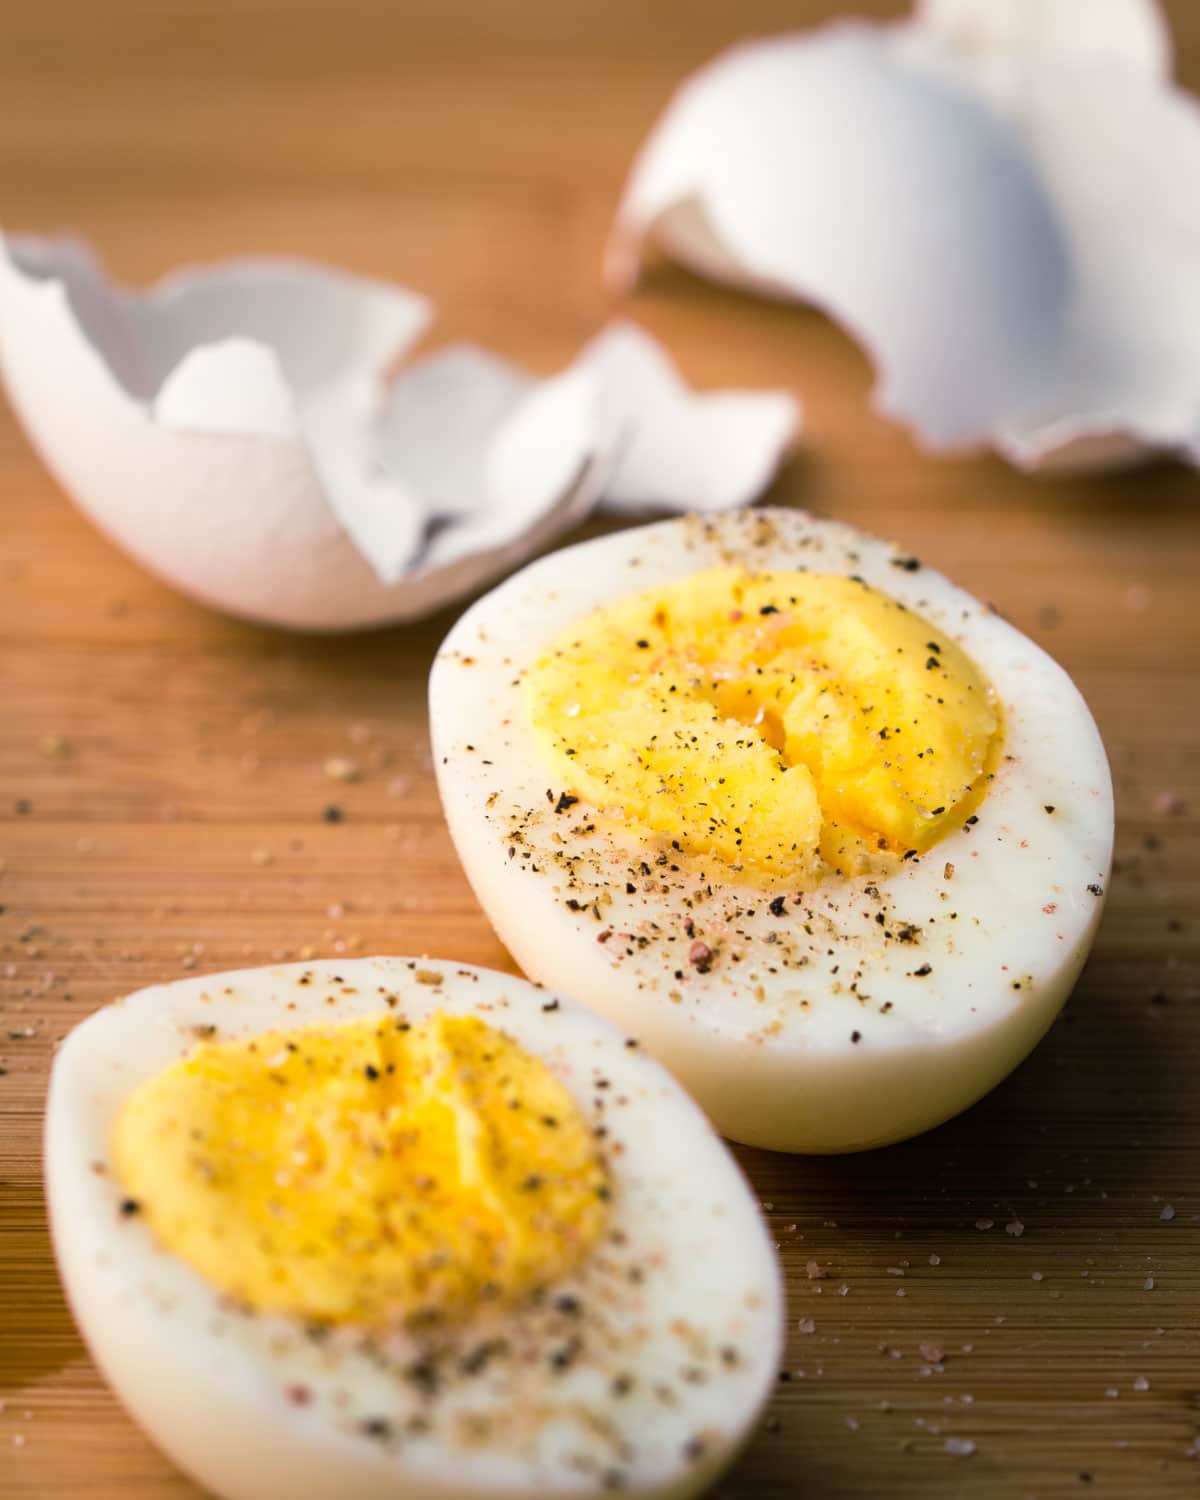 Steamed hard boiled eggs sliced in half with salt and pepper